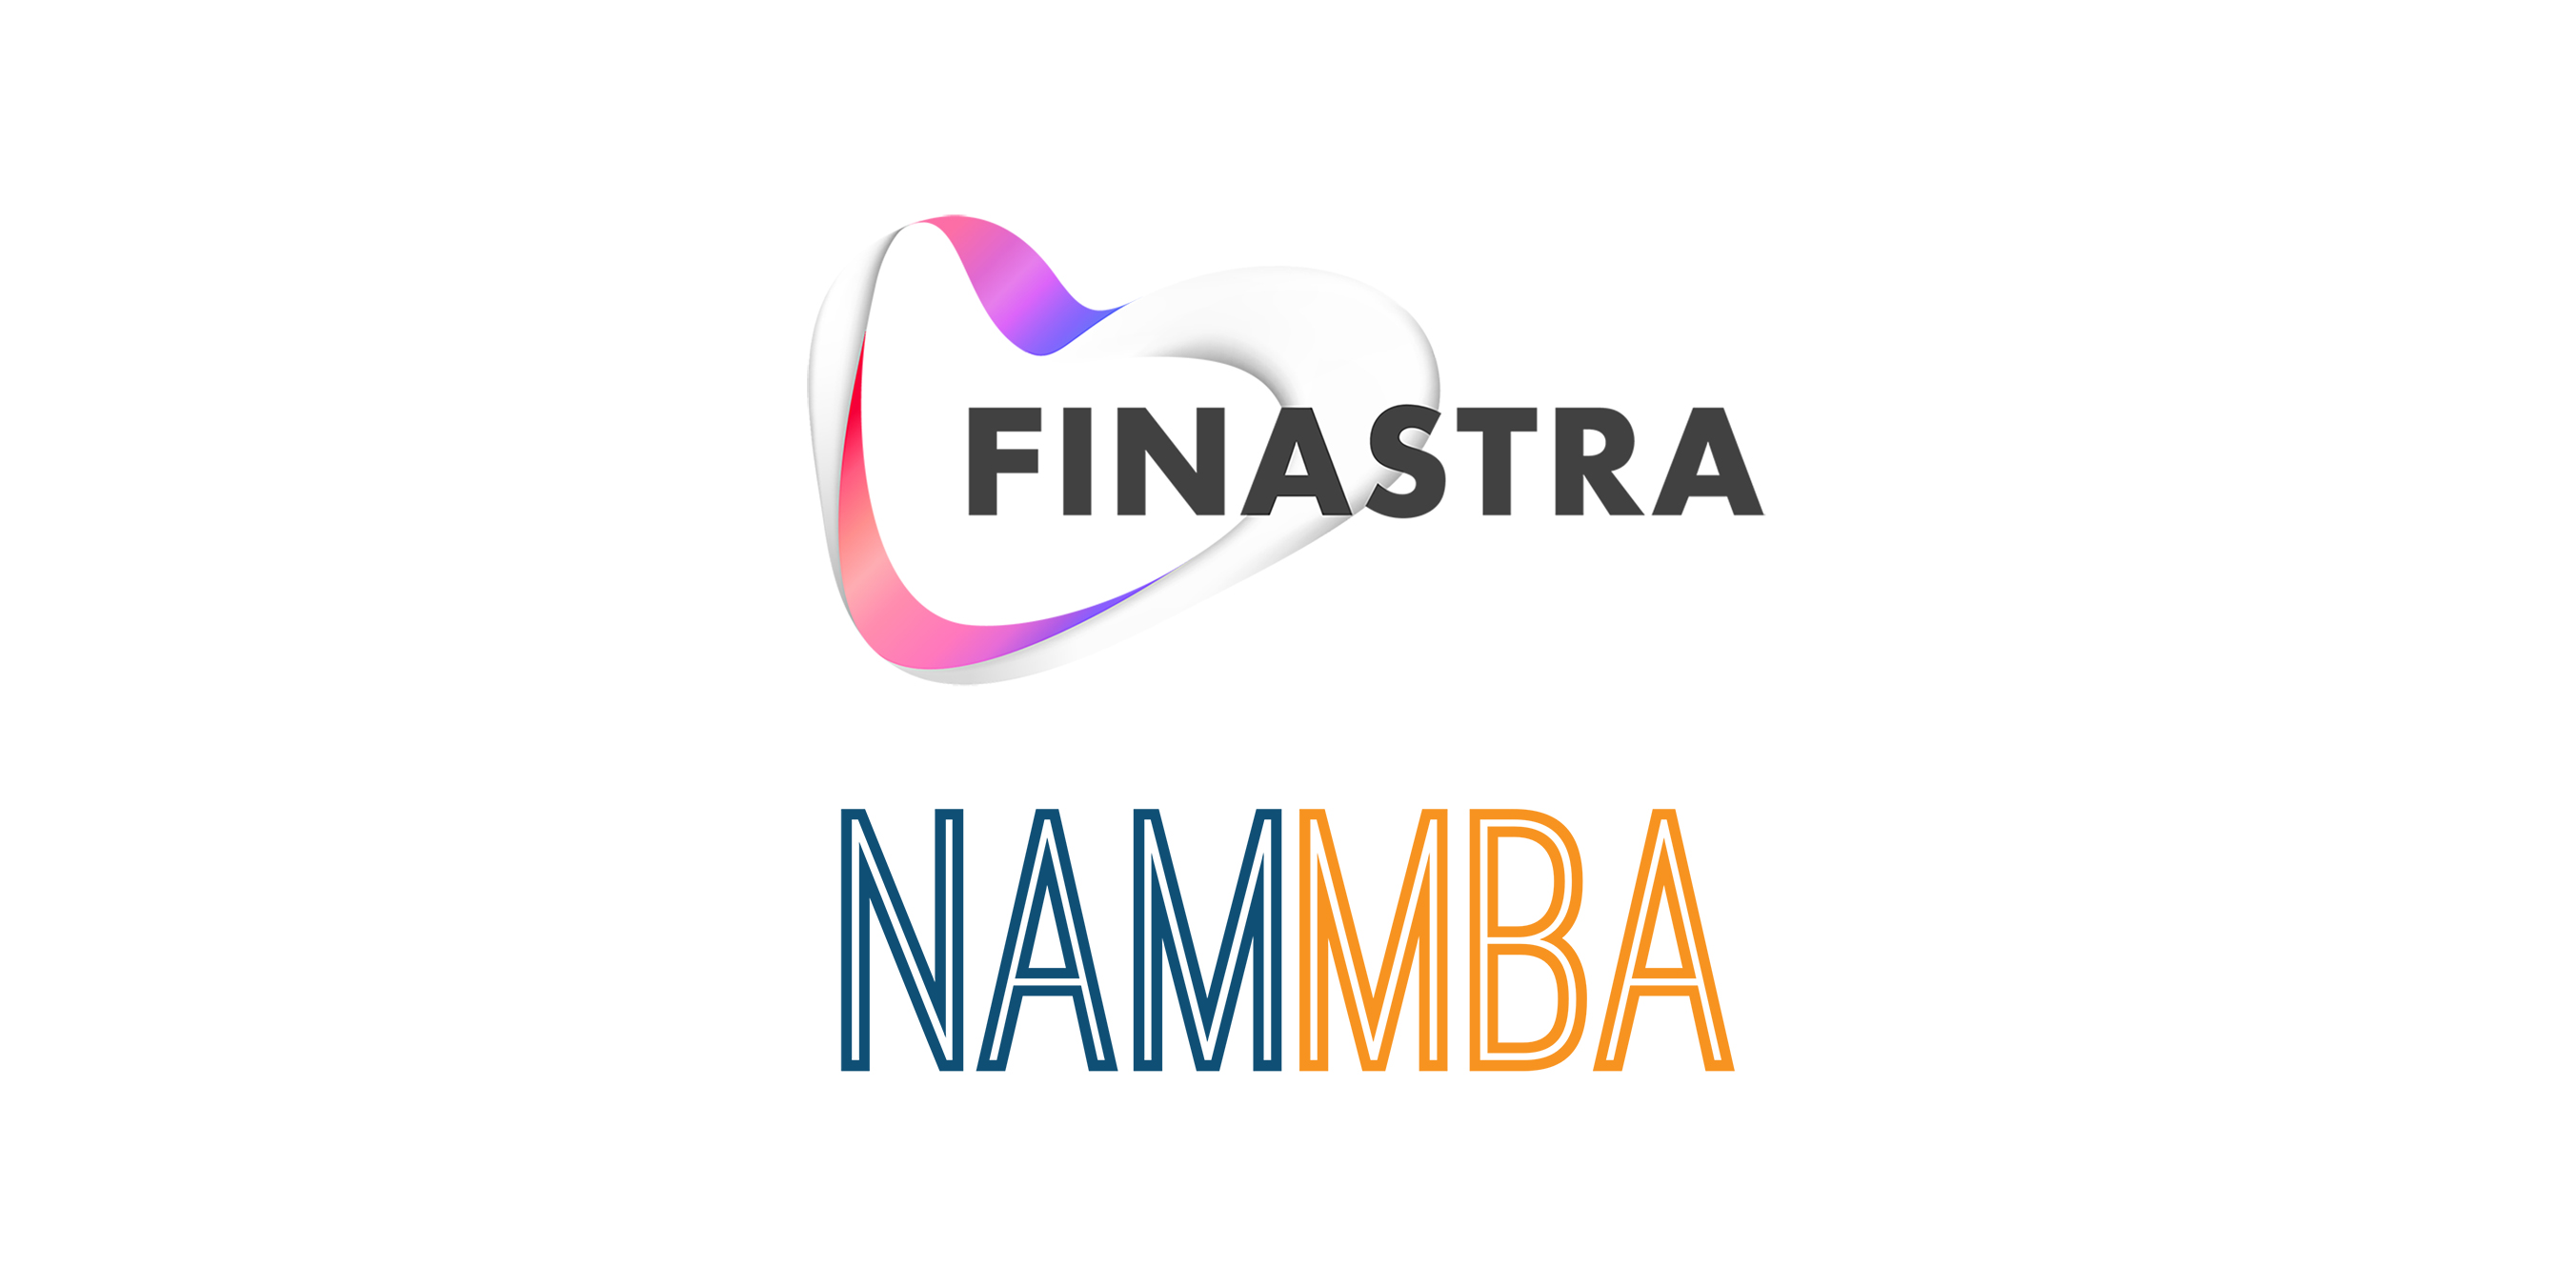 NAMMBA and Finastra Announce Partnership to Effect Positive Change in the Mortgage Industry